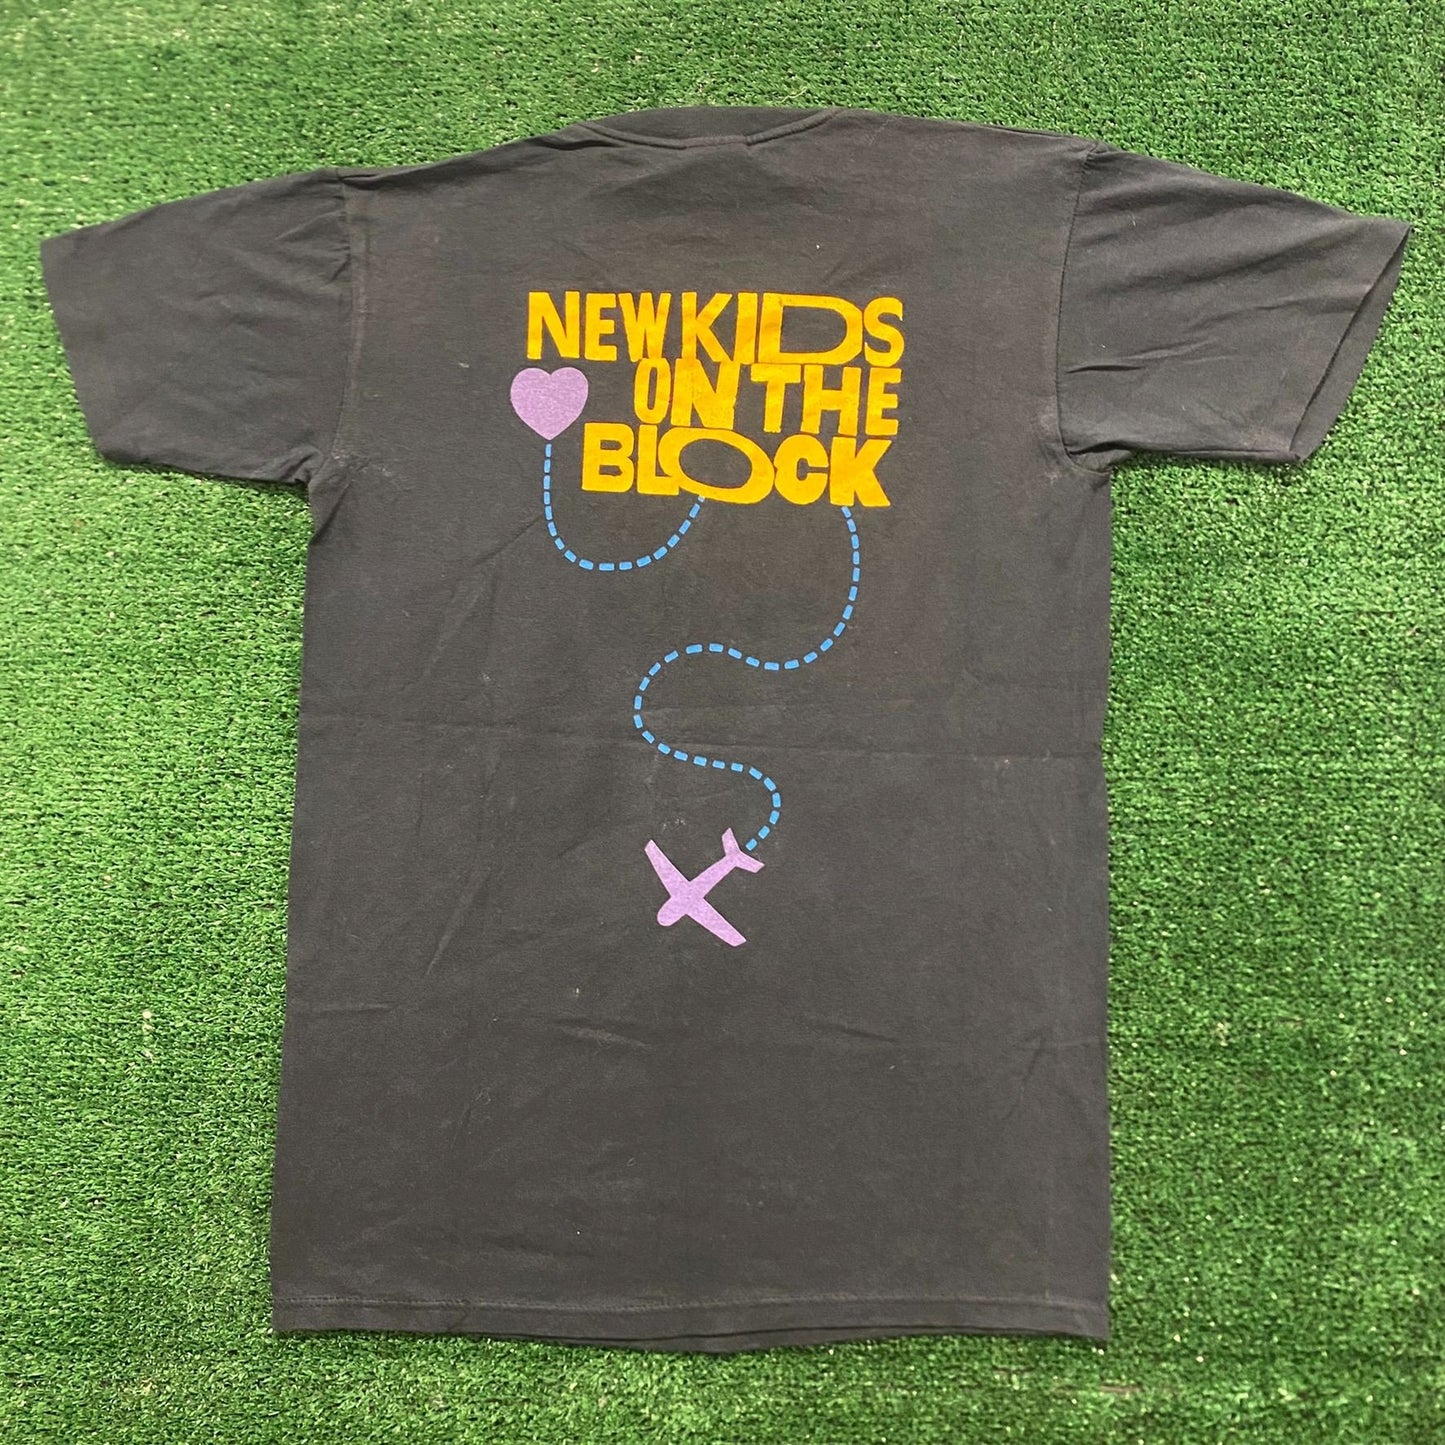 New Kids on the Block Vintage 90s Boy Band T-Shirt